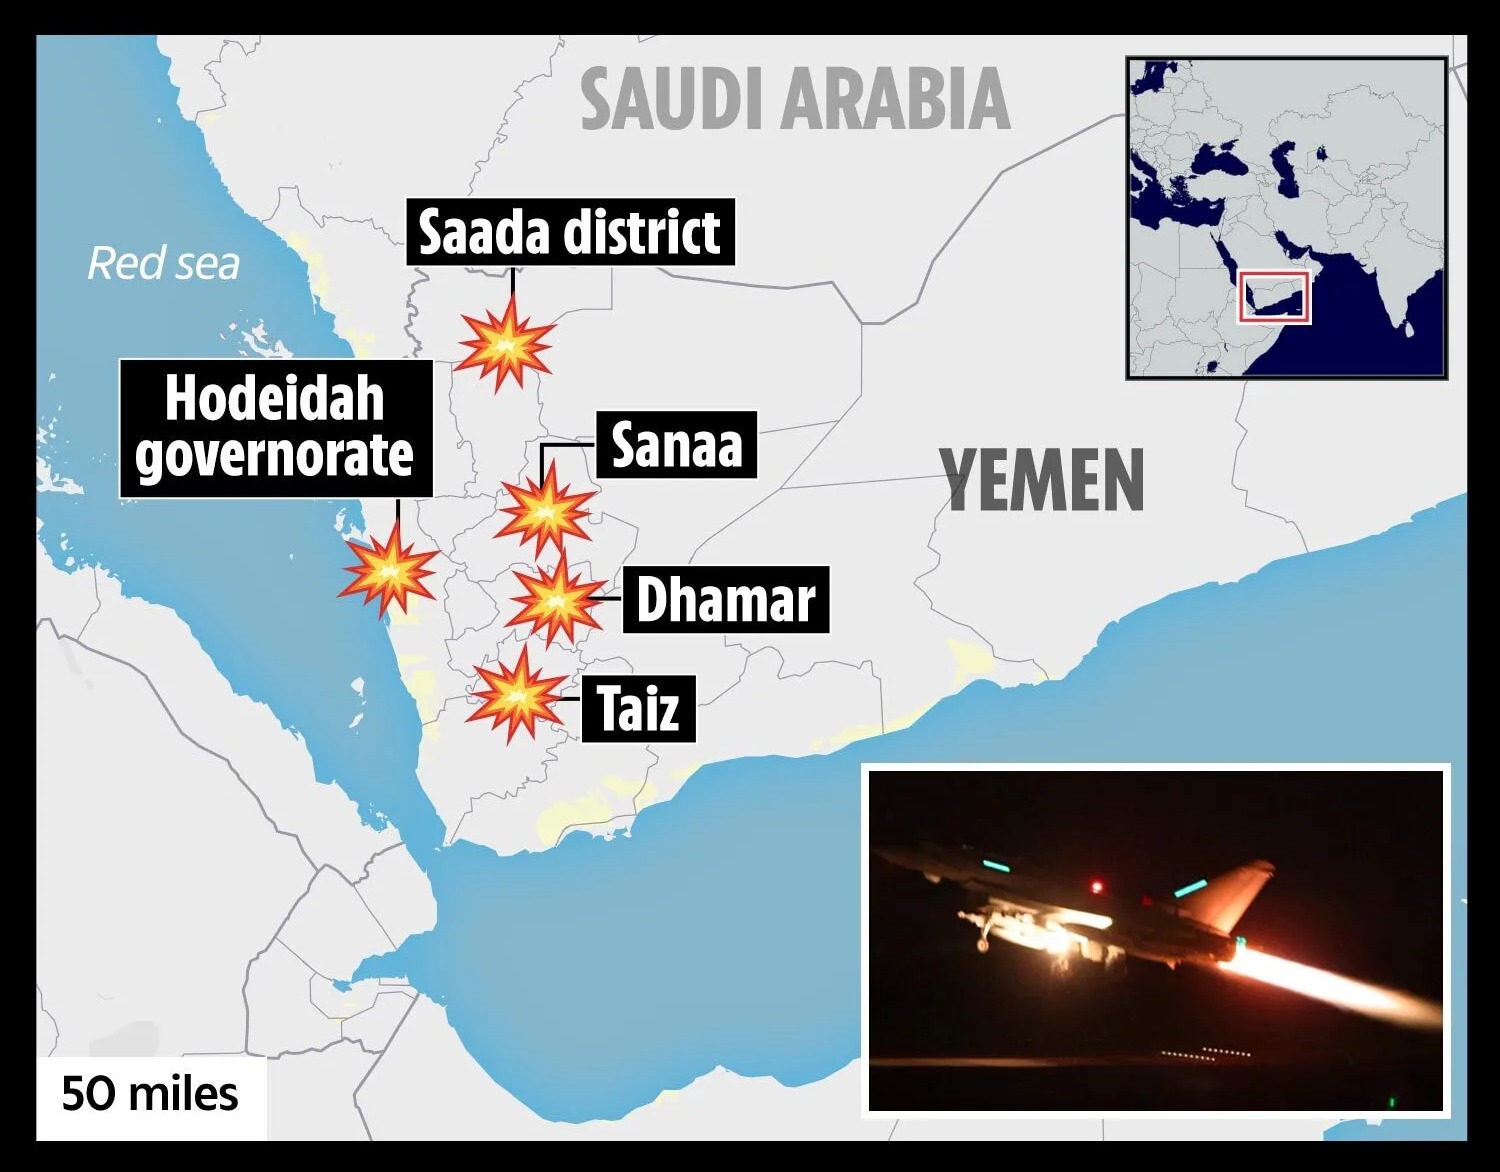 The US and UK's joint airstrikes on January 11 targeted 16 Houthi bases across Yemen